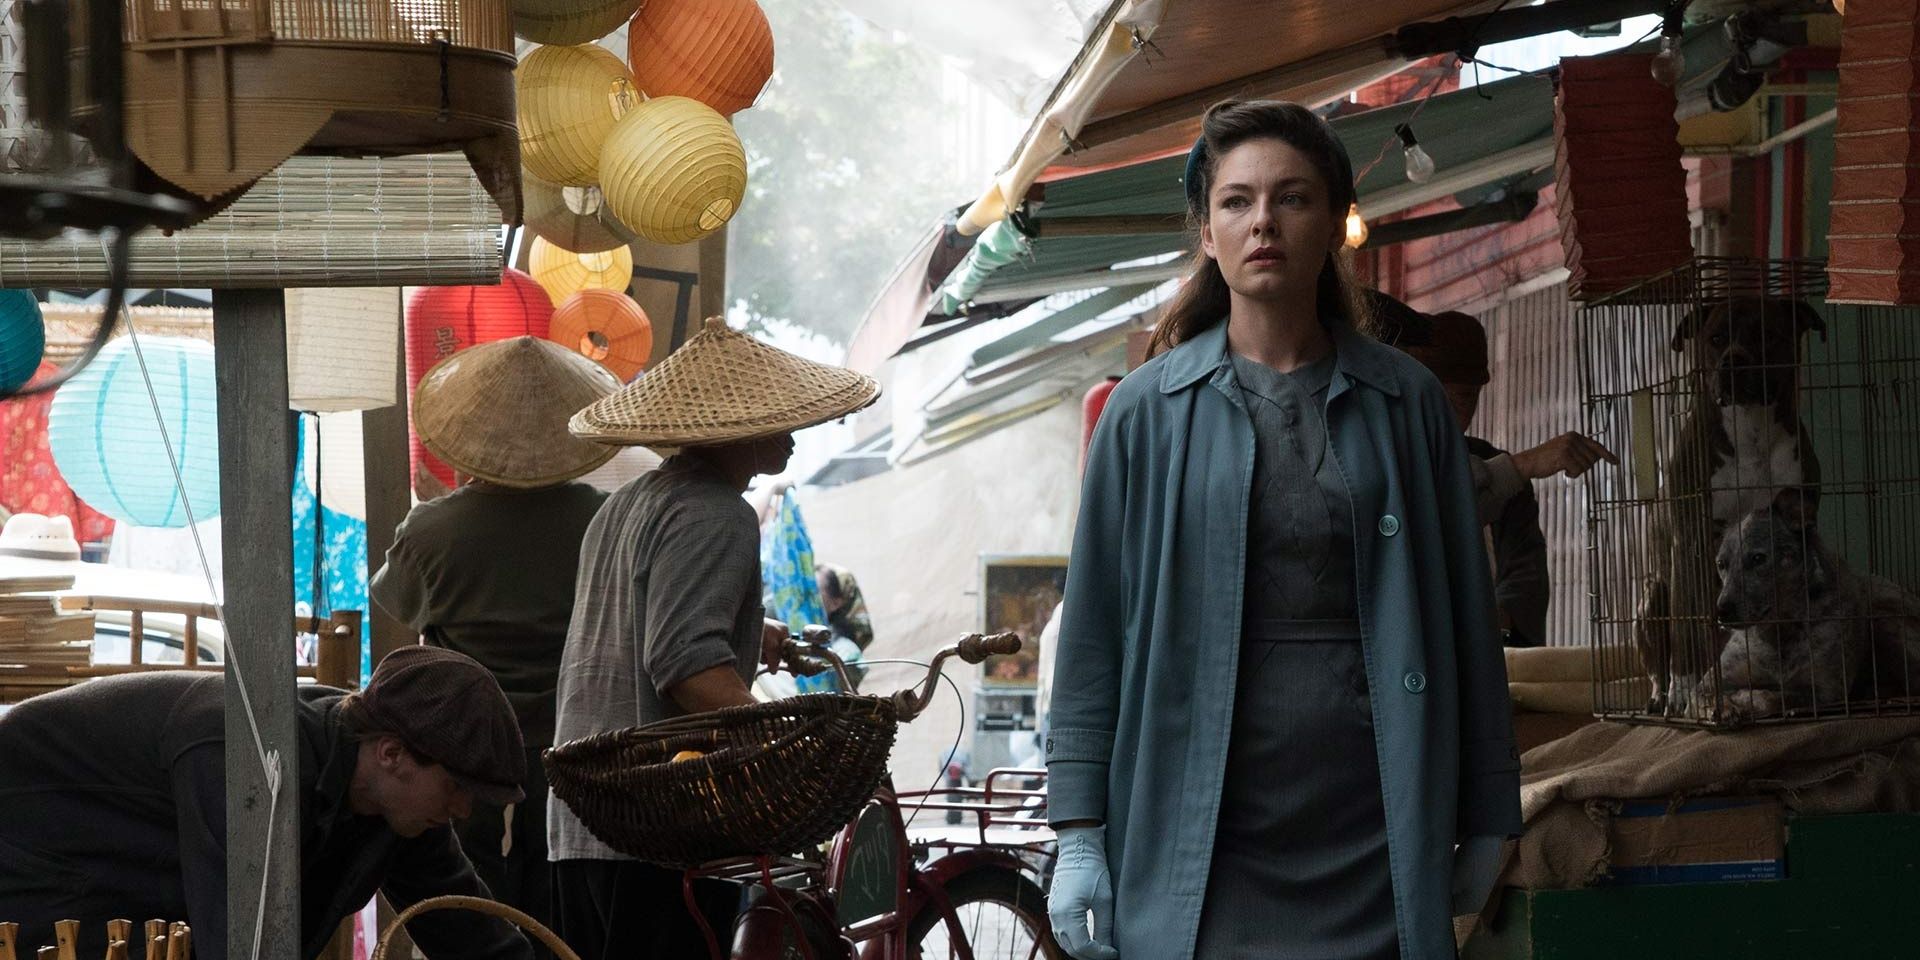 A woman walks in a busy street in The Man In the High Castle 